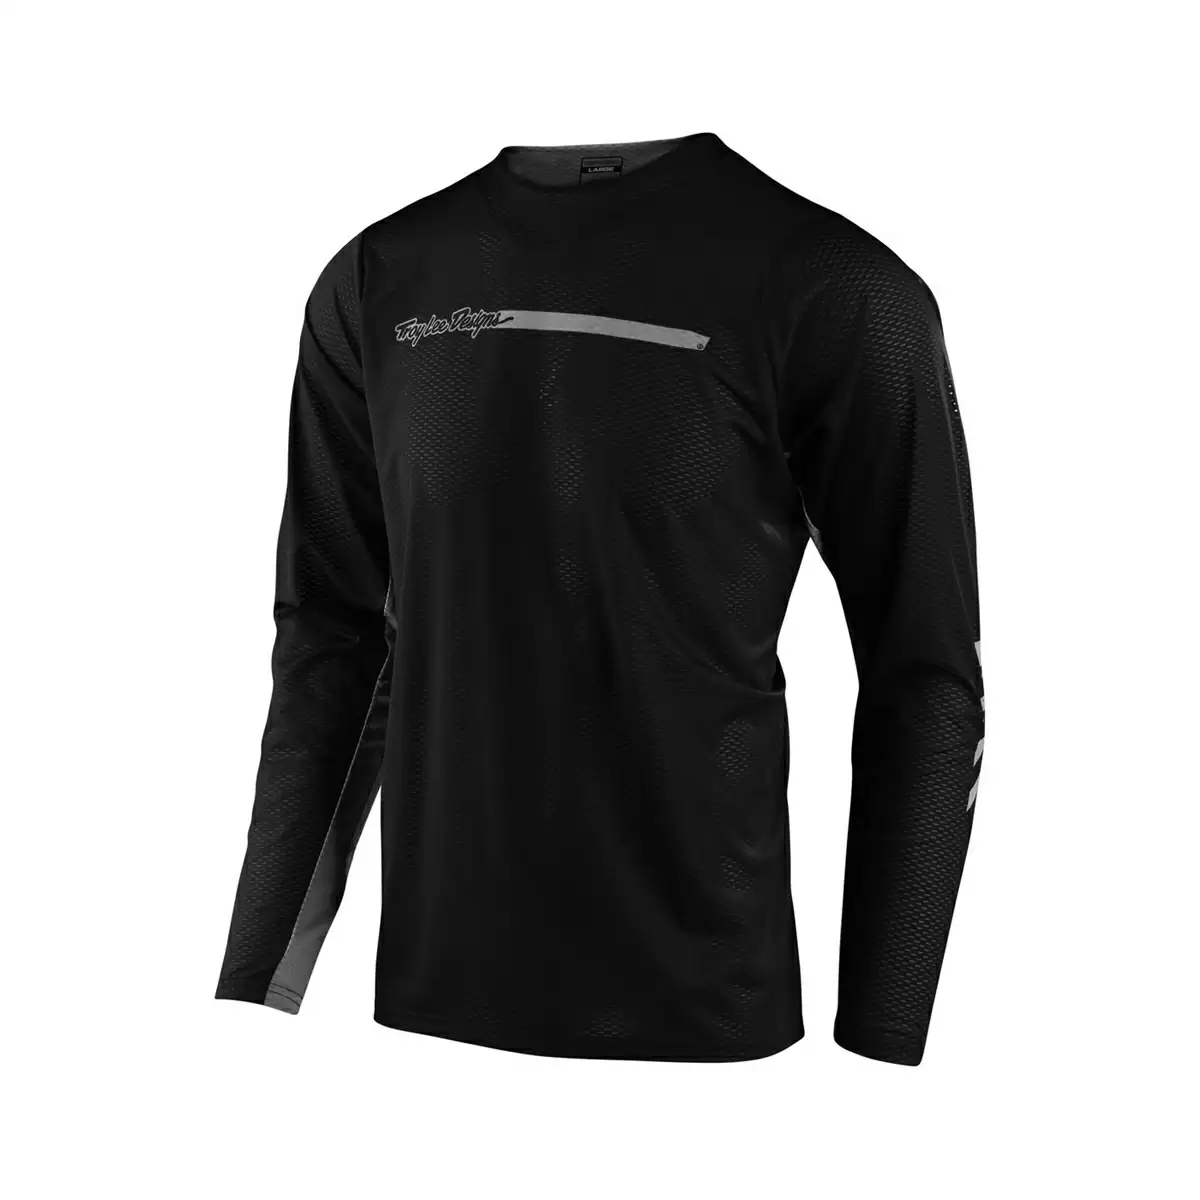 Jersey Skyline Air Channel Long-Sleeve Black Size L - image